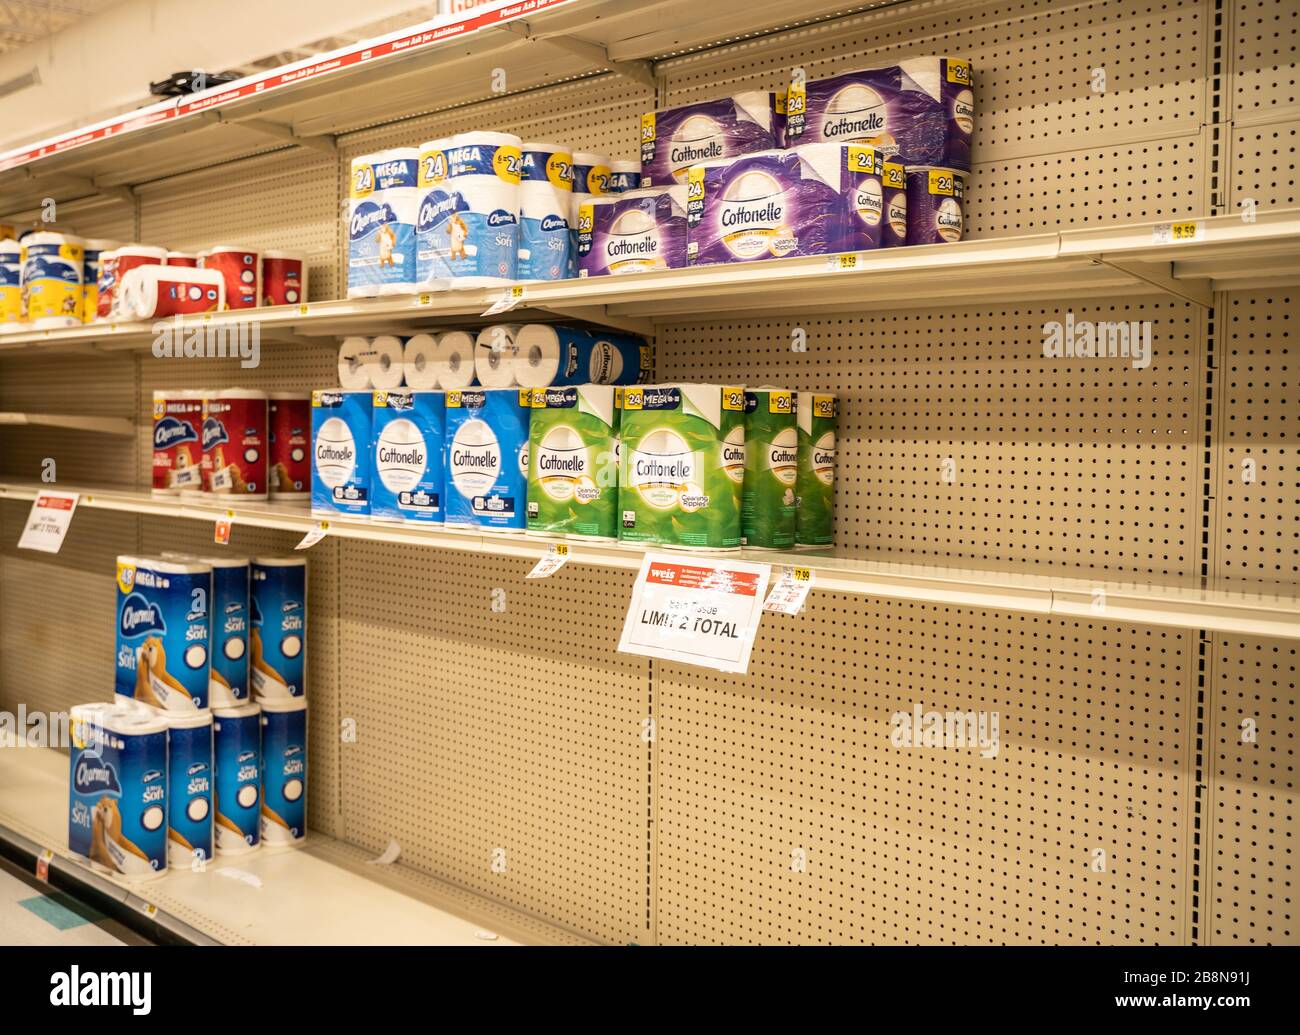 Berks County, Pennsylvania, USA-March 14, 2020: Half empty store shelves with limited supply of toiletpaper Stock Photo